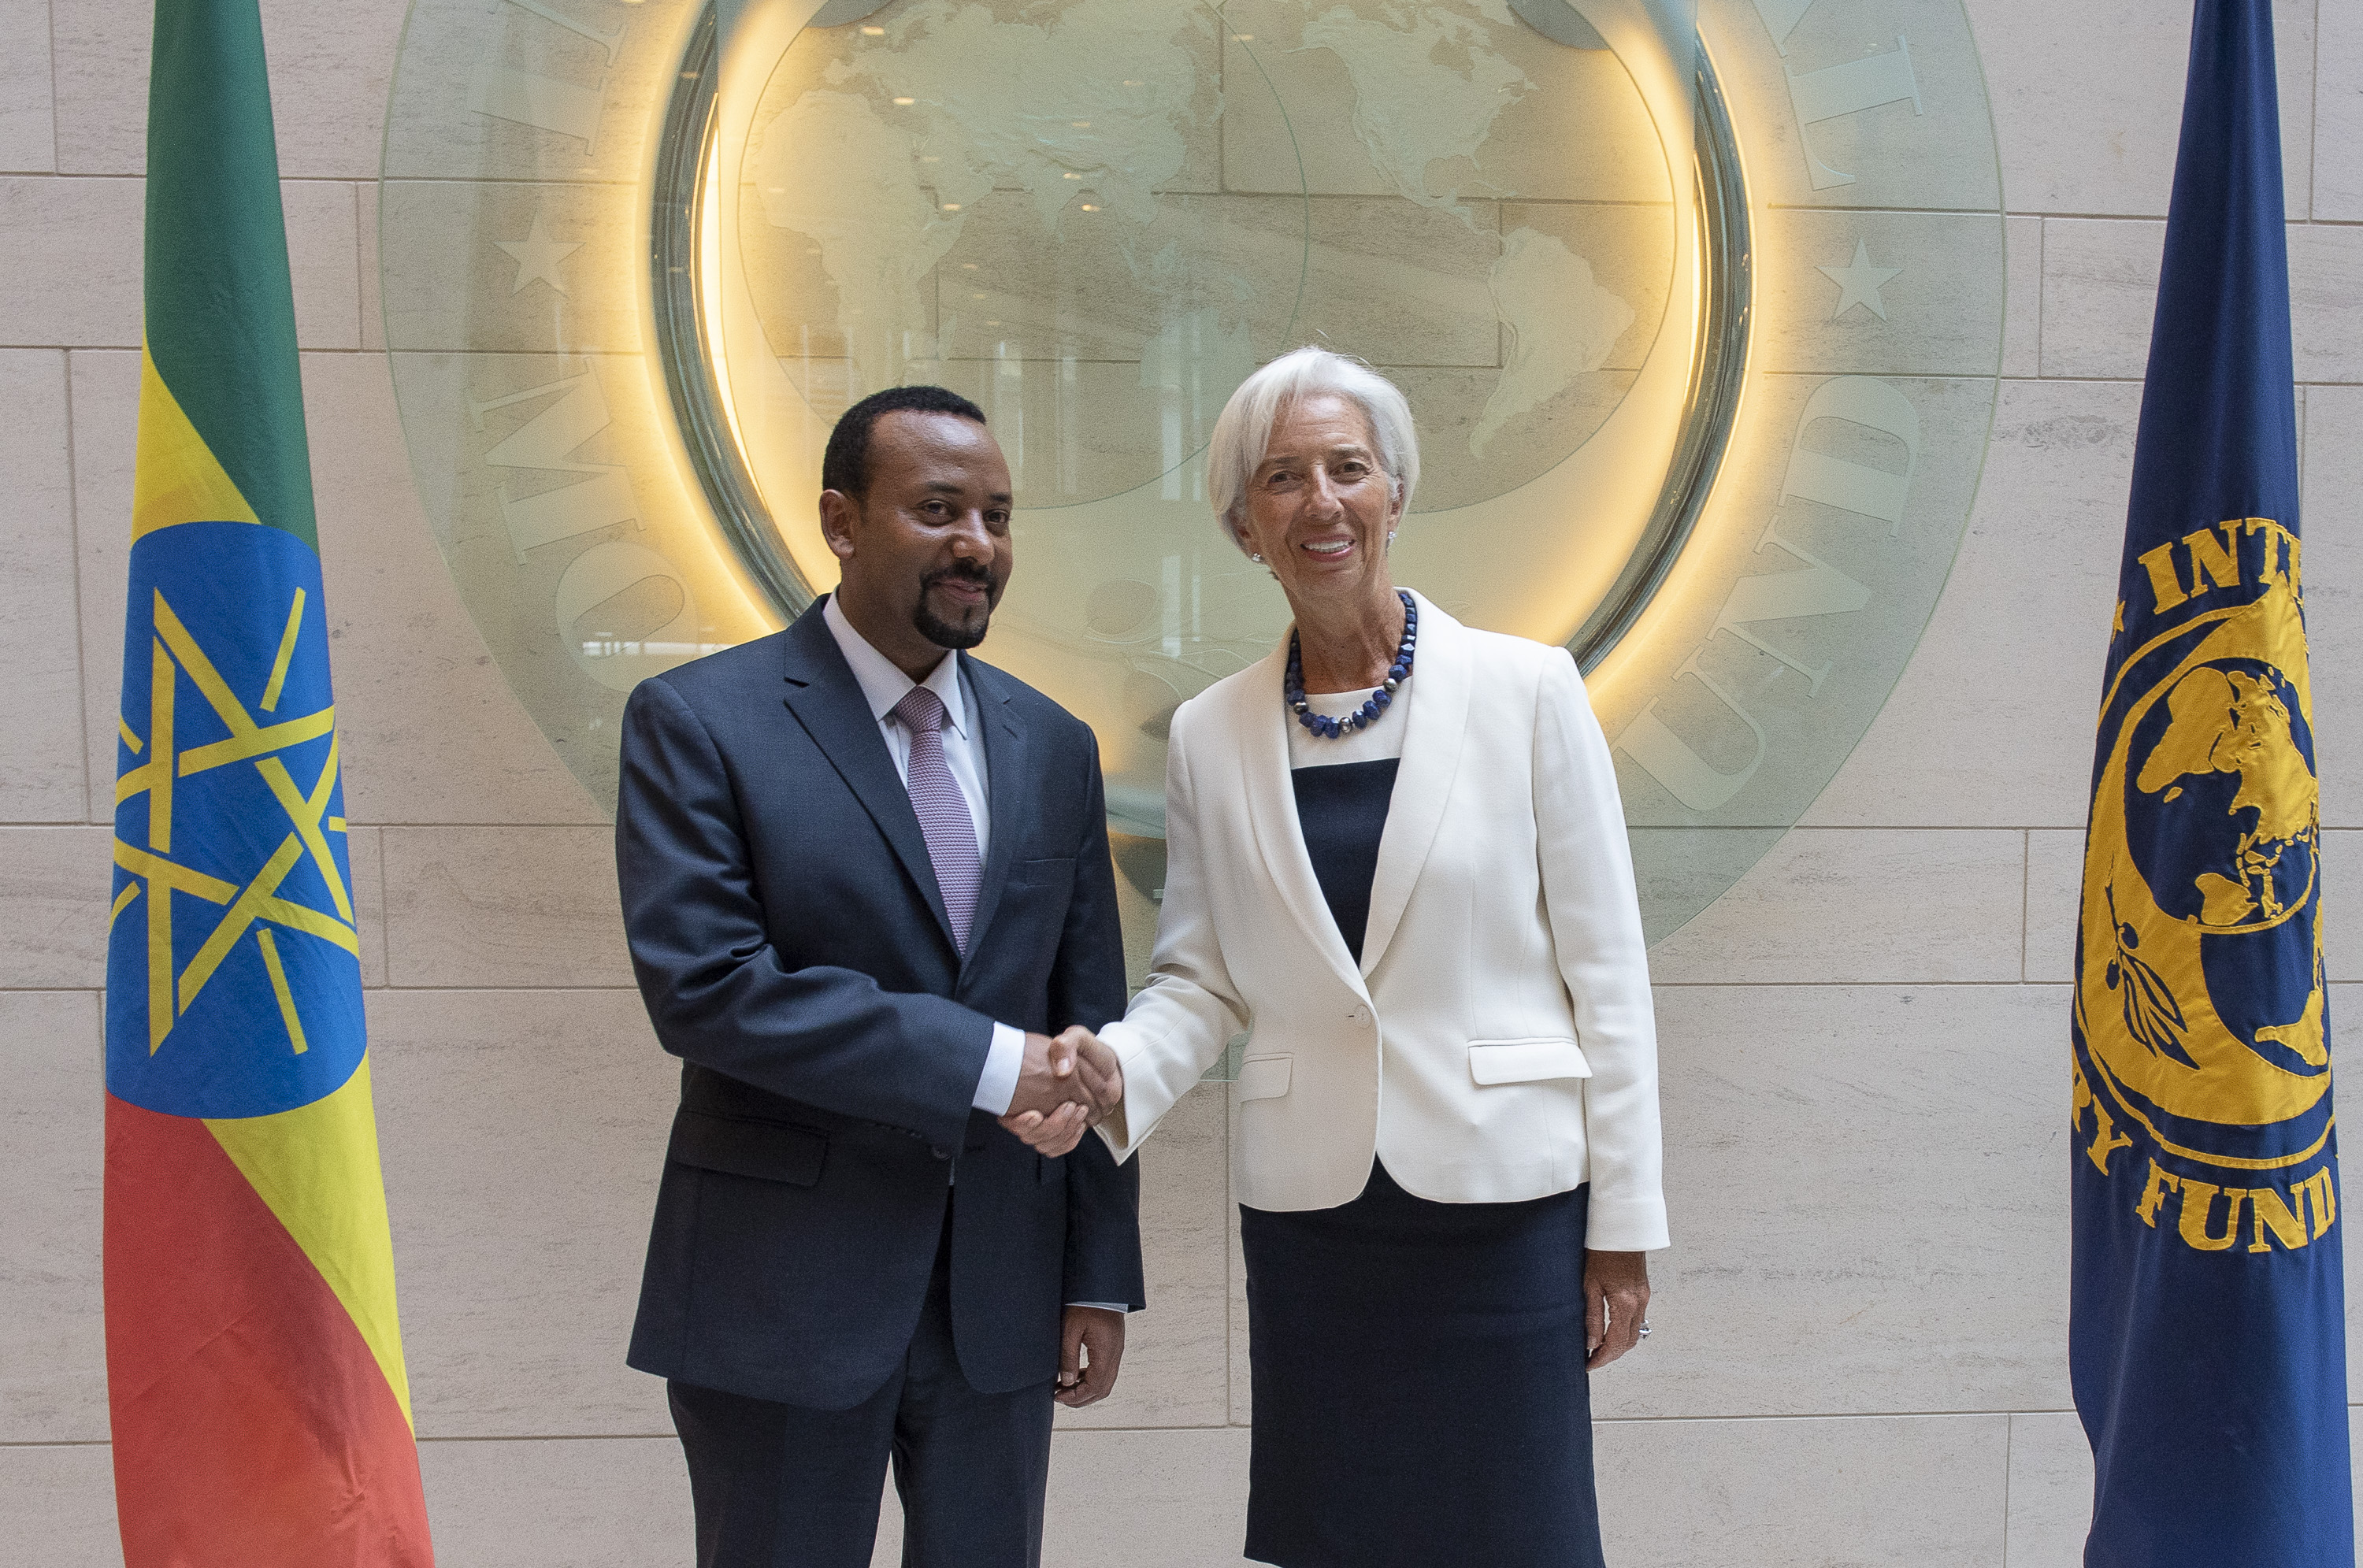 Prime Minister Abiy Ahmed of Ethiopia (photo credit: International Monetary Fund/flickr)